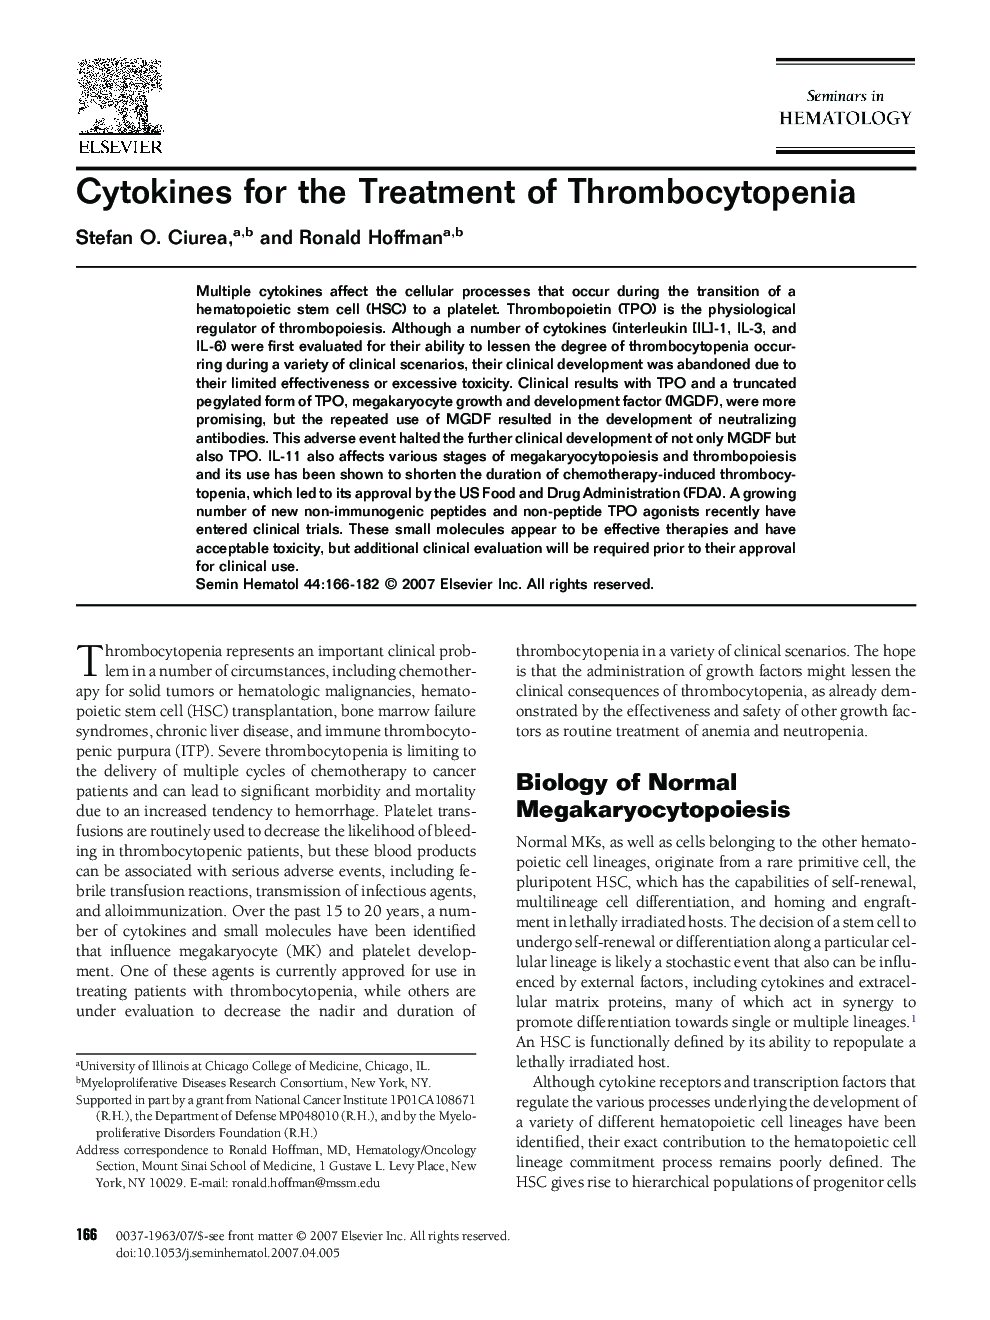 Cytokines for the Treatment of Thrombocytopenia 